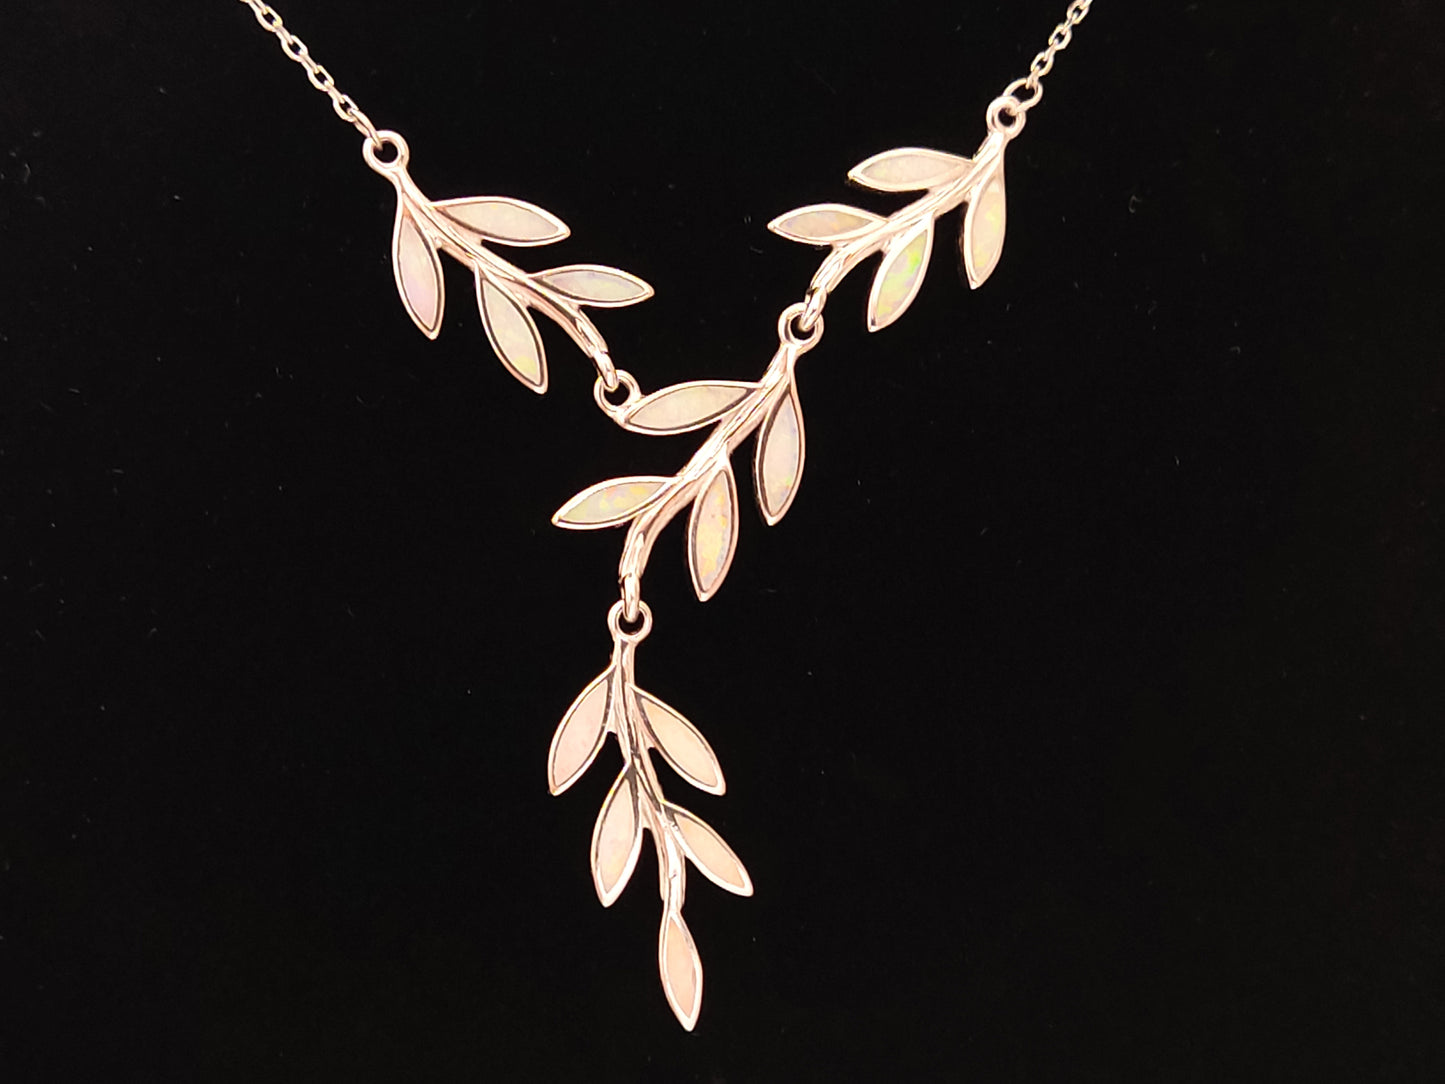 Greek silver necklace with leaves design and white opal stones on black background.